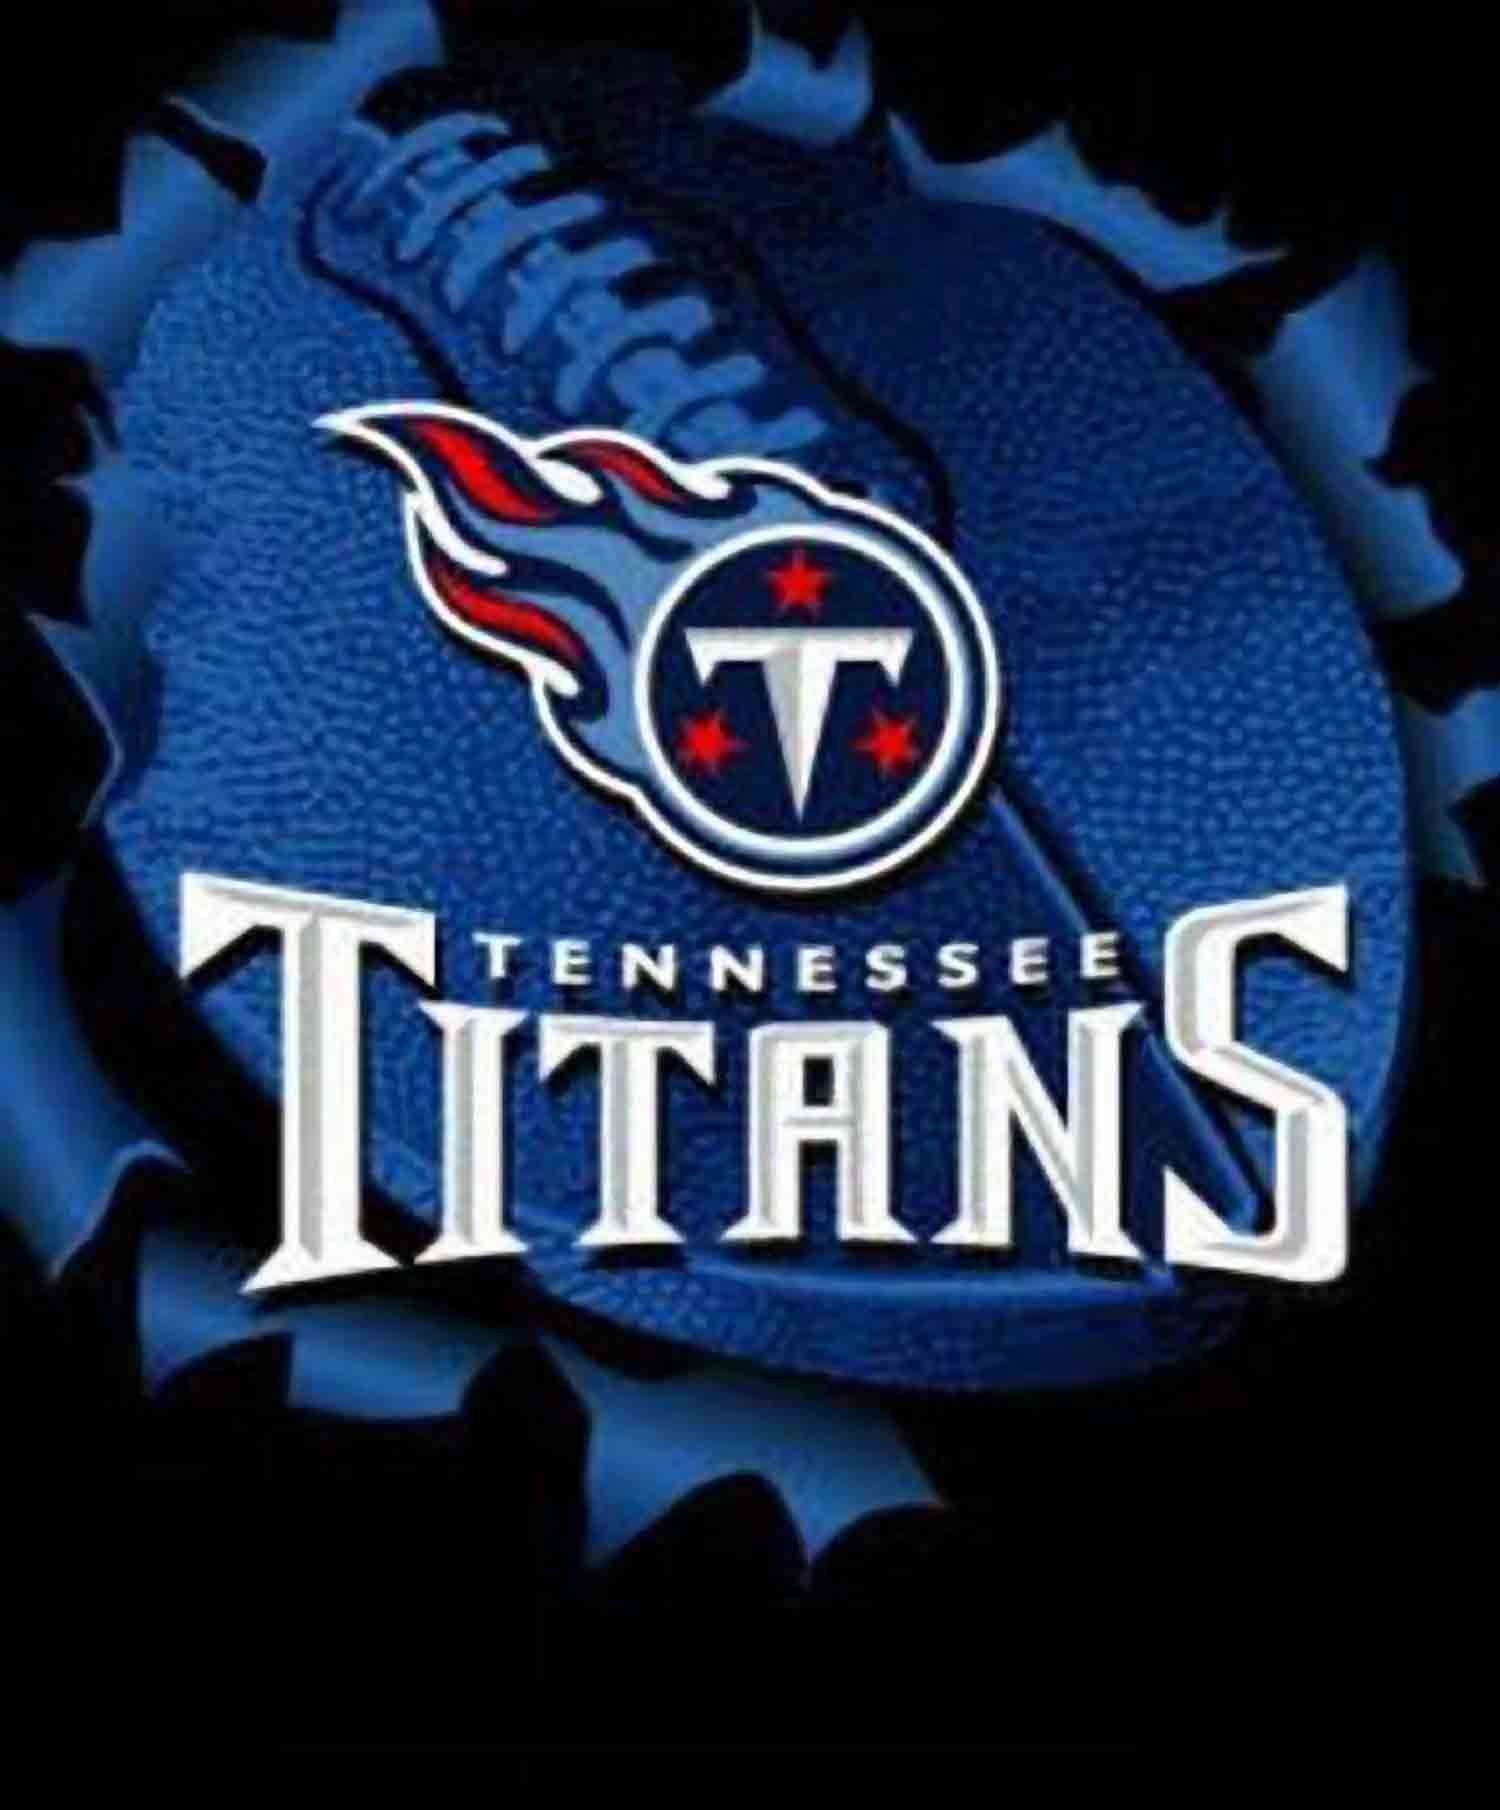 Tennessee titans.